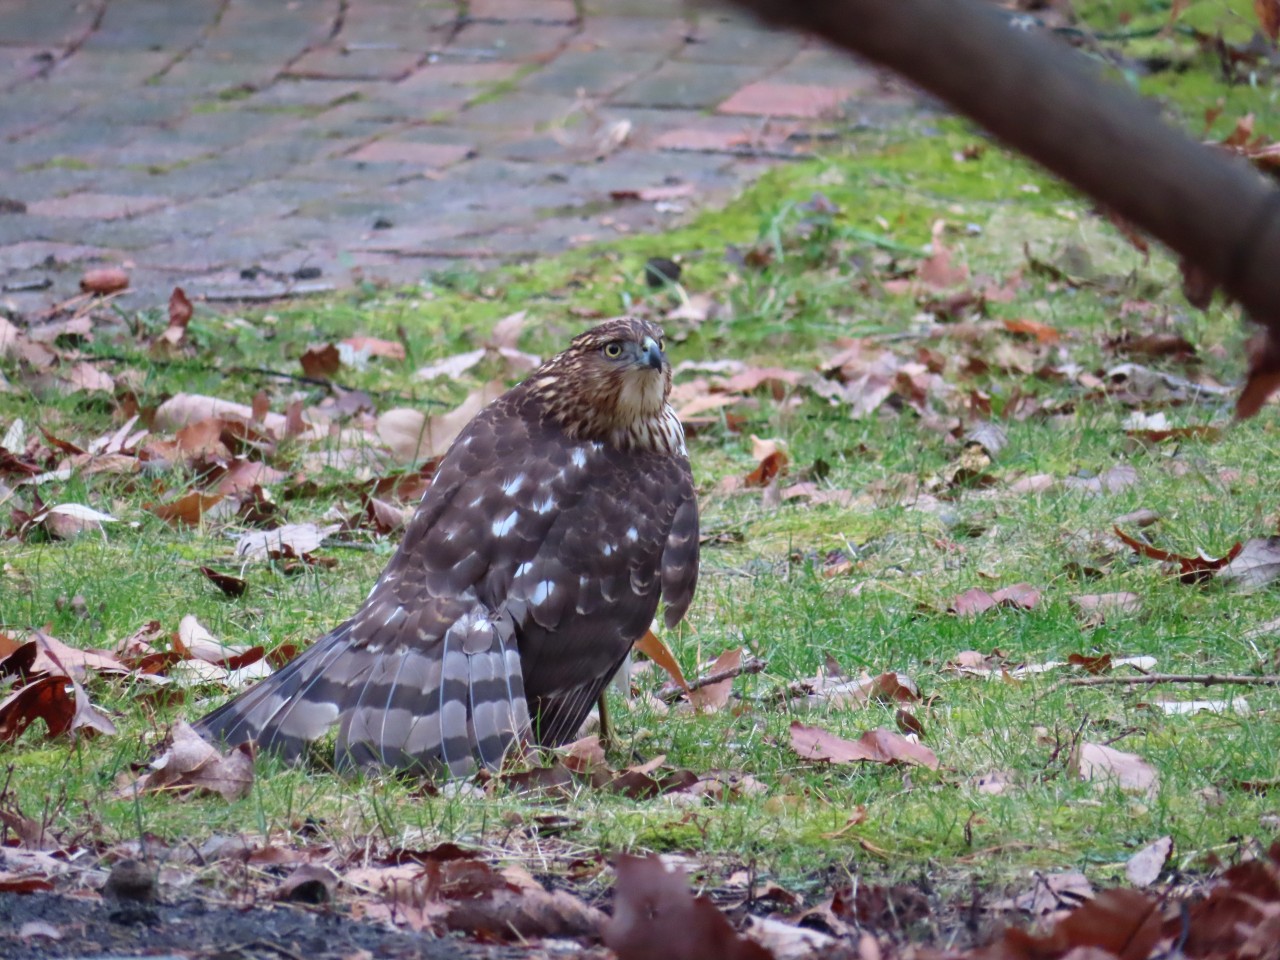 This was so cool! I heard a scuffle in the yard and saw something flying off. A pair of young cooper’s hawks were having a scuffle over some prey! They kept staring each other down from across the street, all ruffled up. #coopers hawk#birds#birdwatching#nature#raptors#photography #Taken December 31st 2021  #mention of death  #cw: death mention